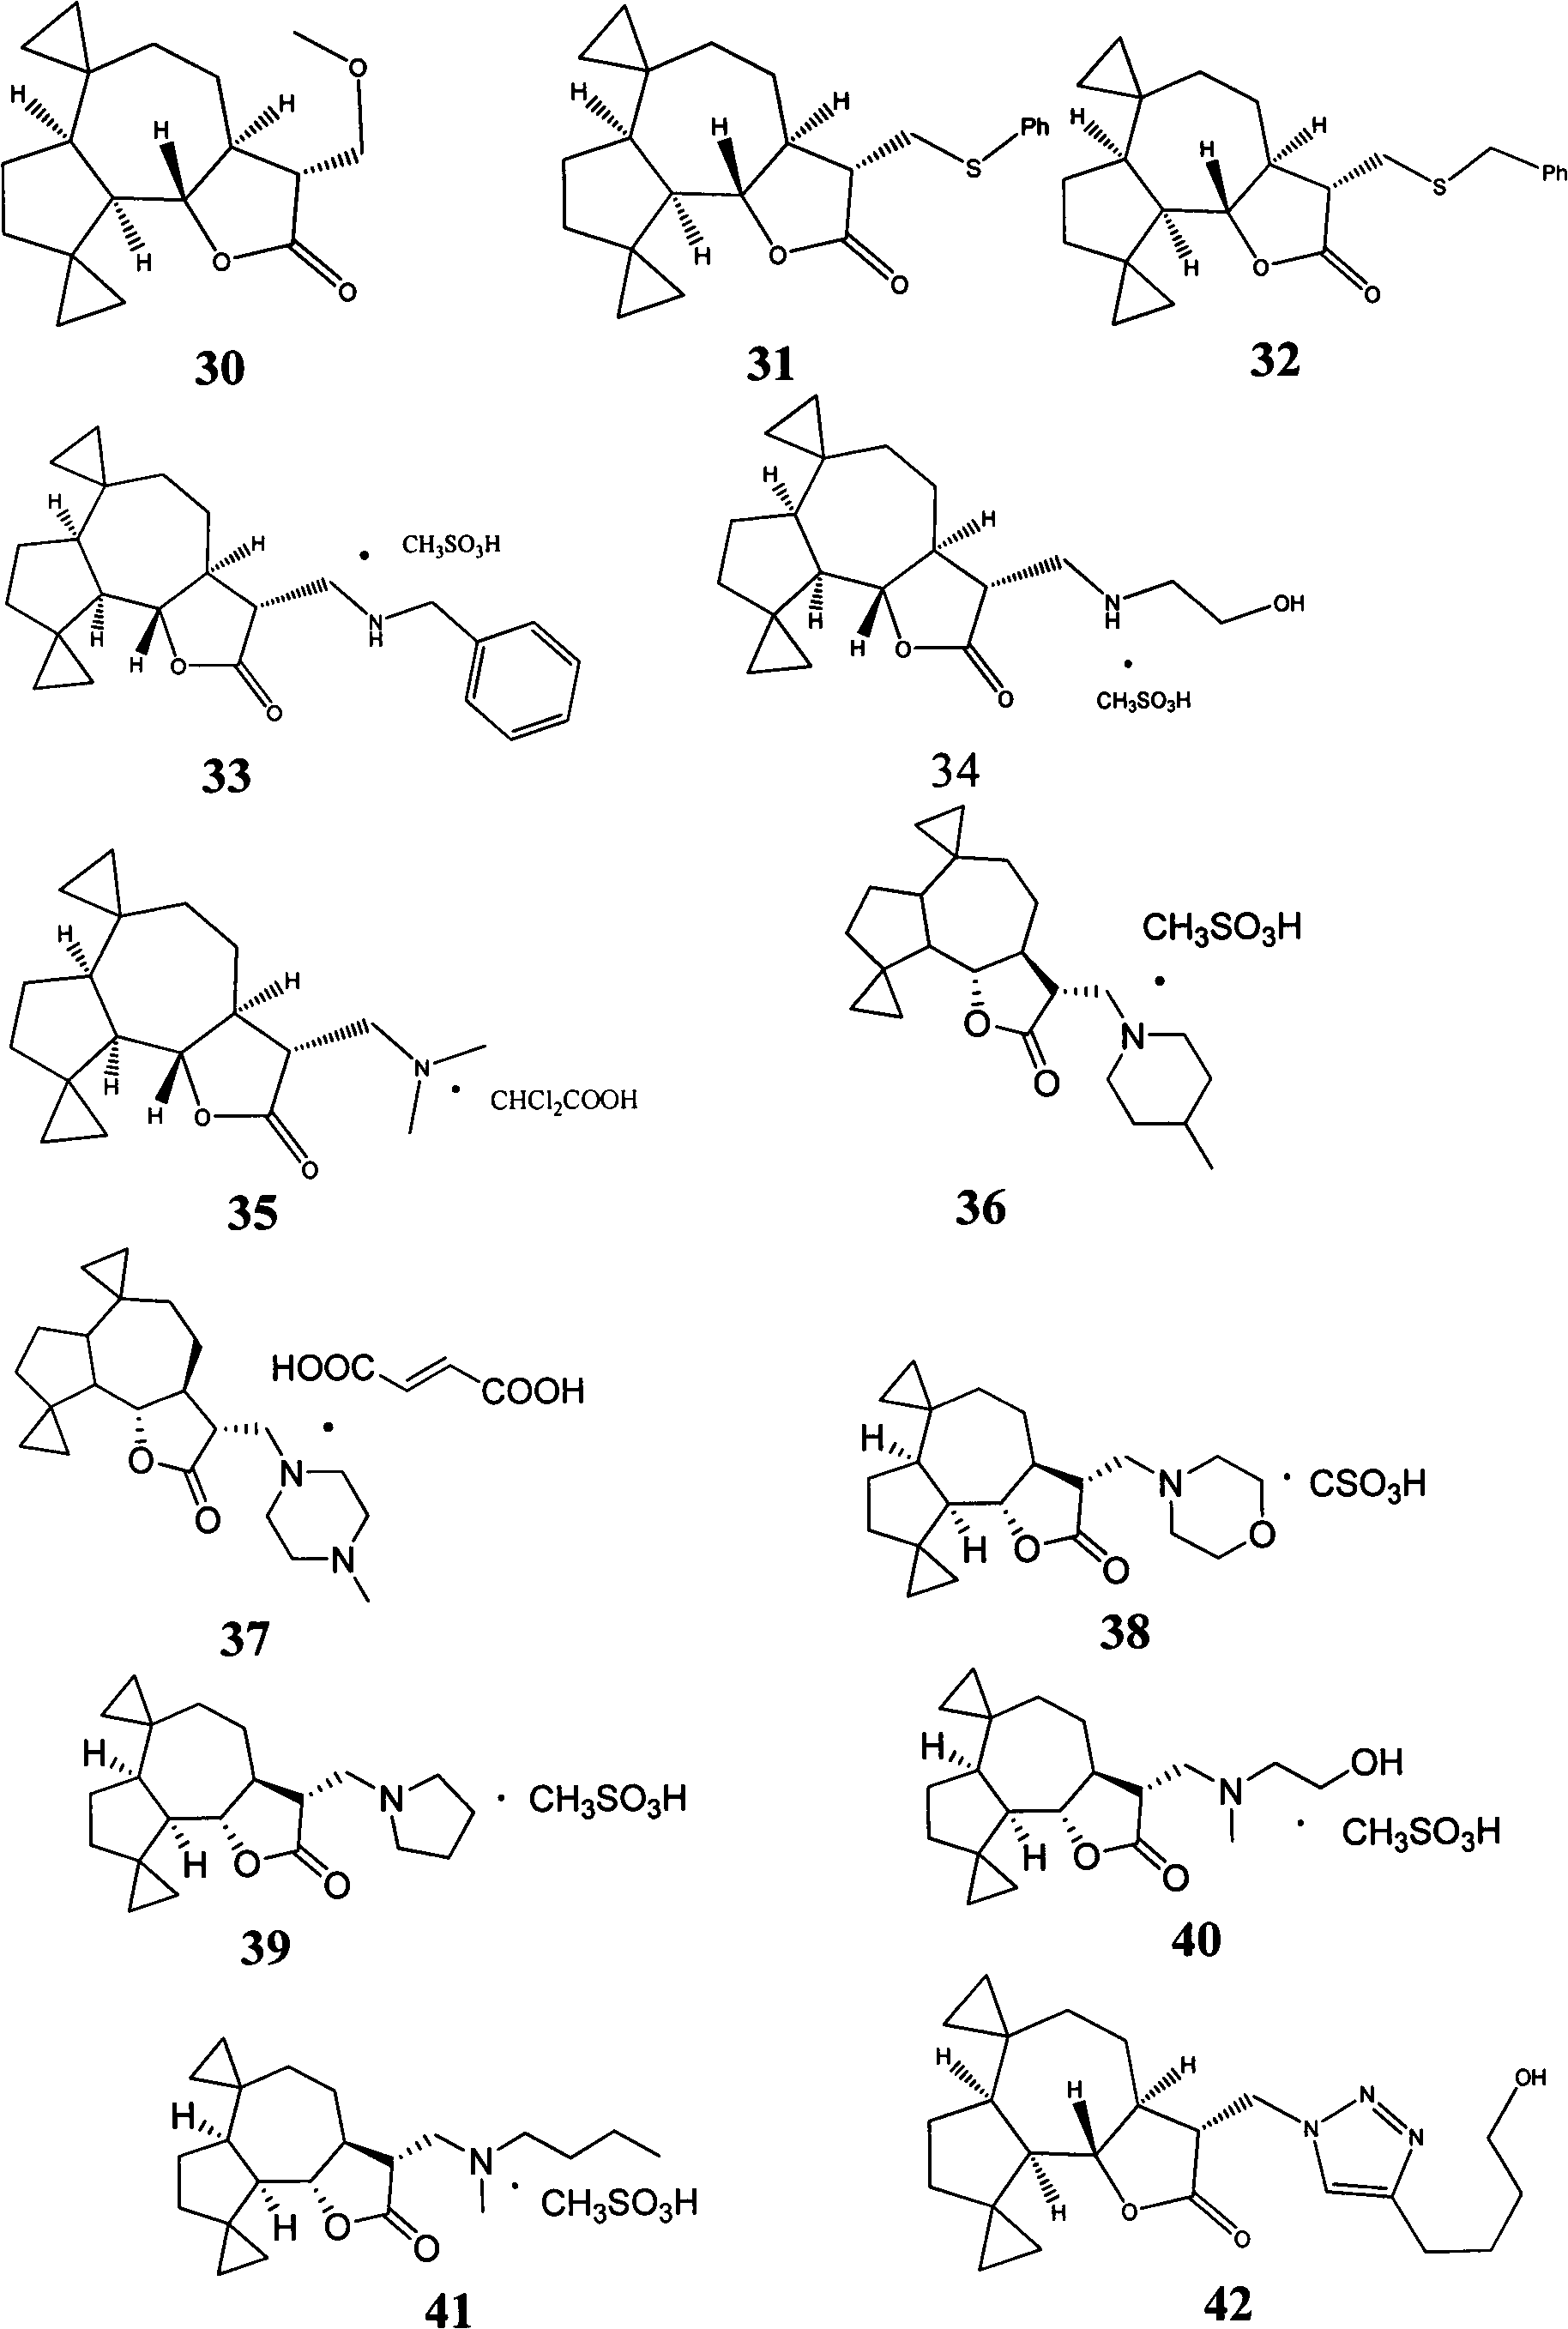 Sesquiterpene lactone compound and uses of derivative thereof in preparation of drugs